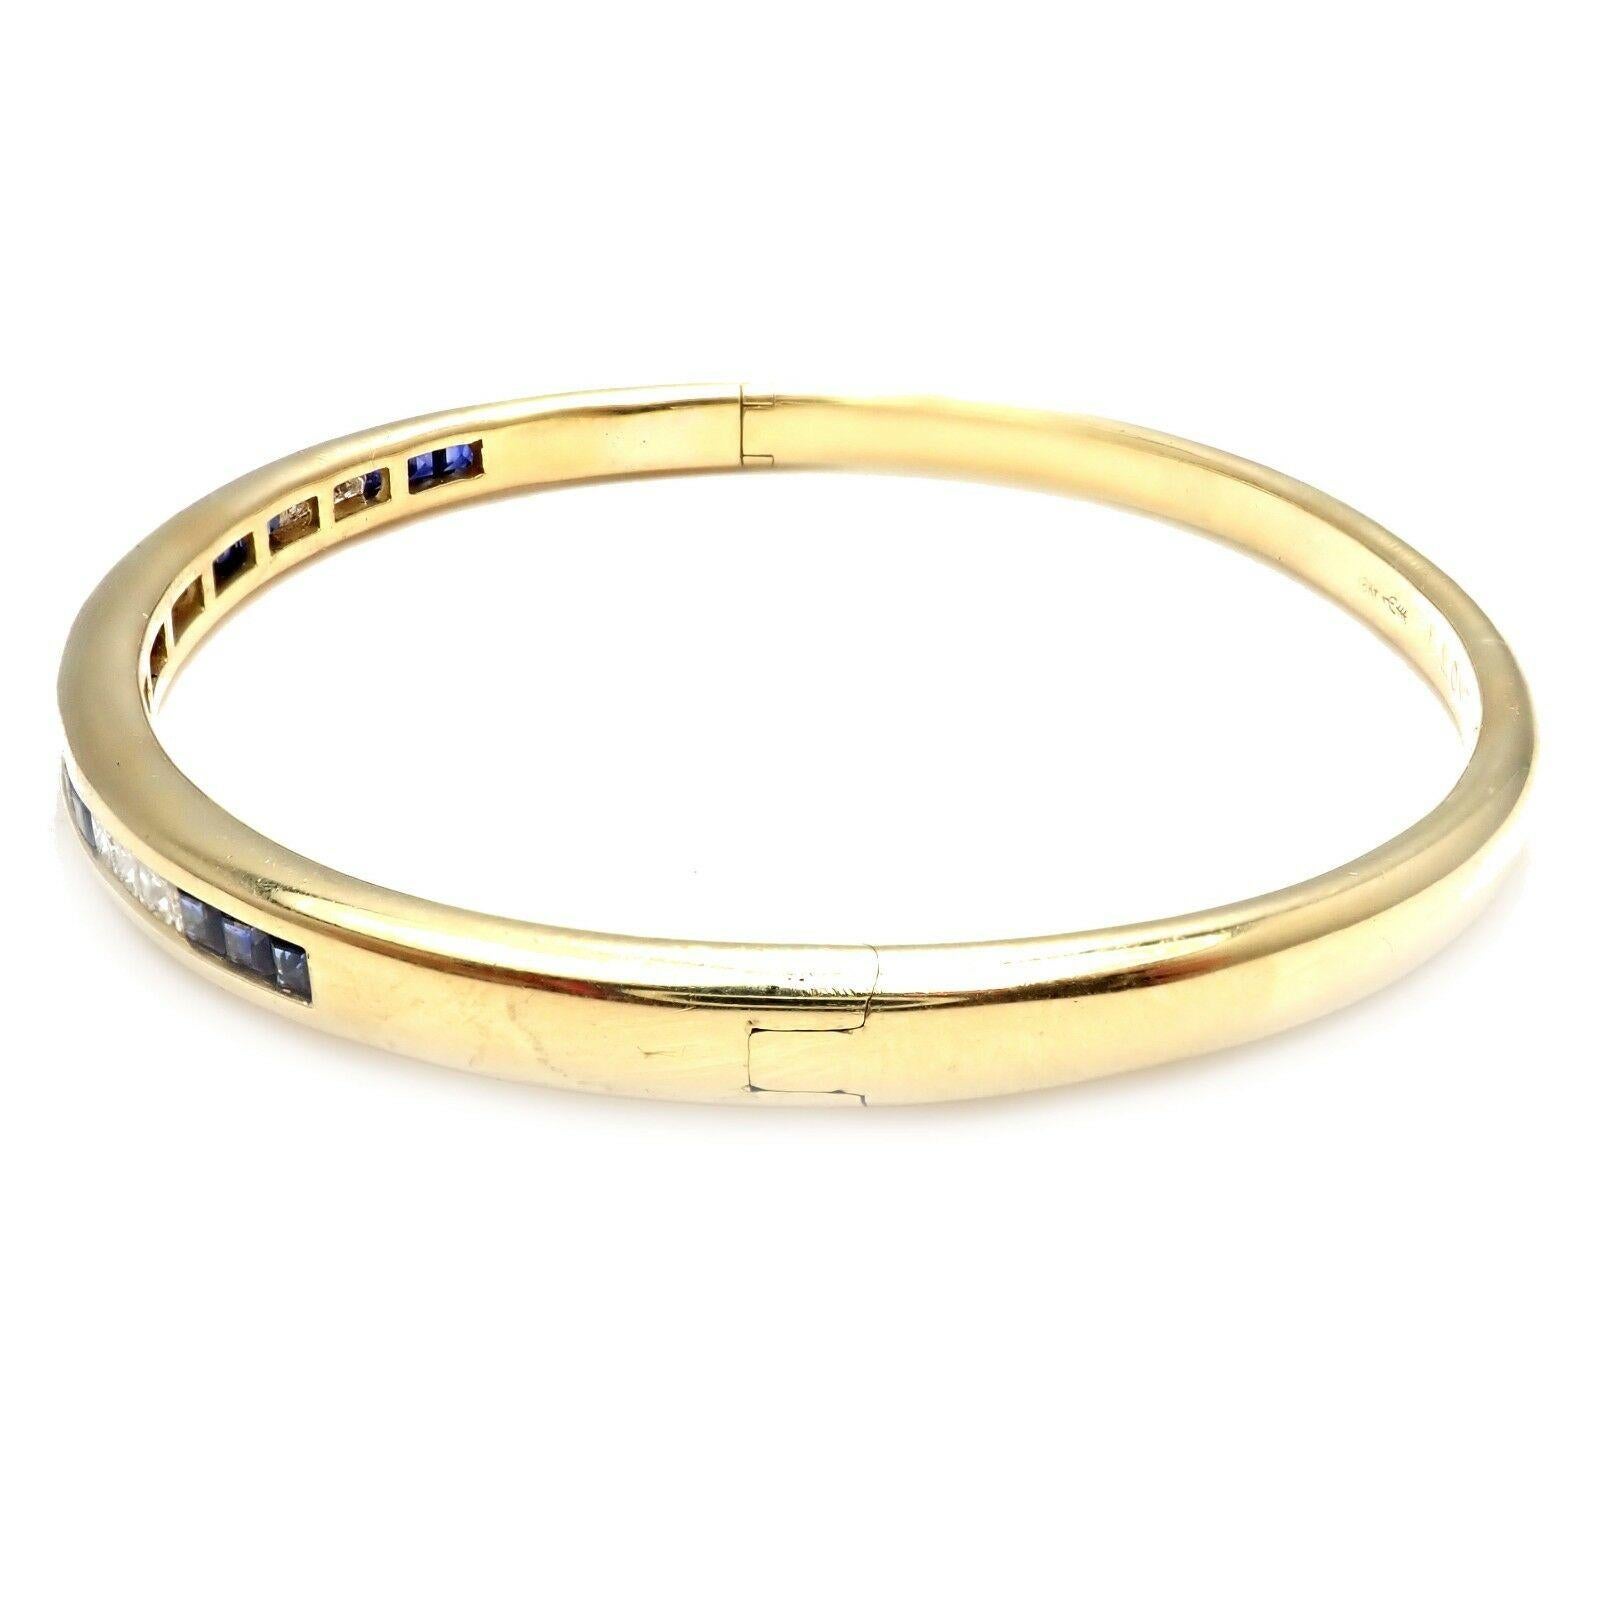 Craig Drake Sapphire Diamond Yellow Gold Bangle Bracelet In Excellent Condition For Sale In Holland, PA